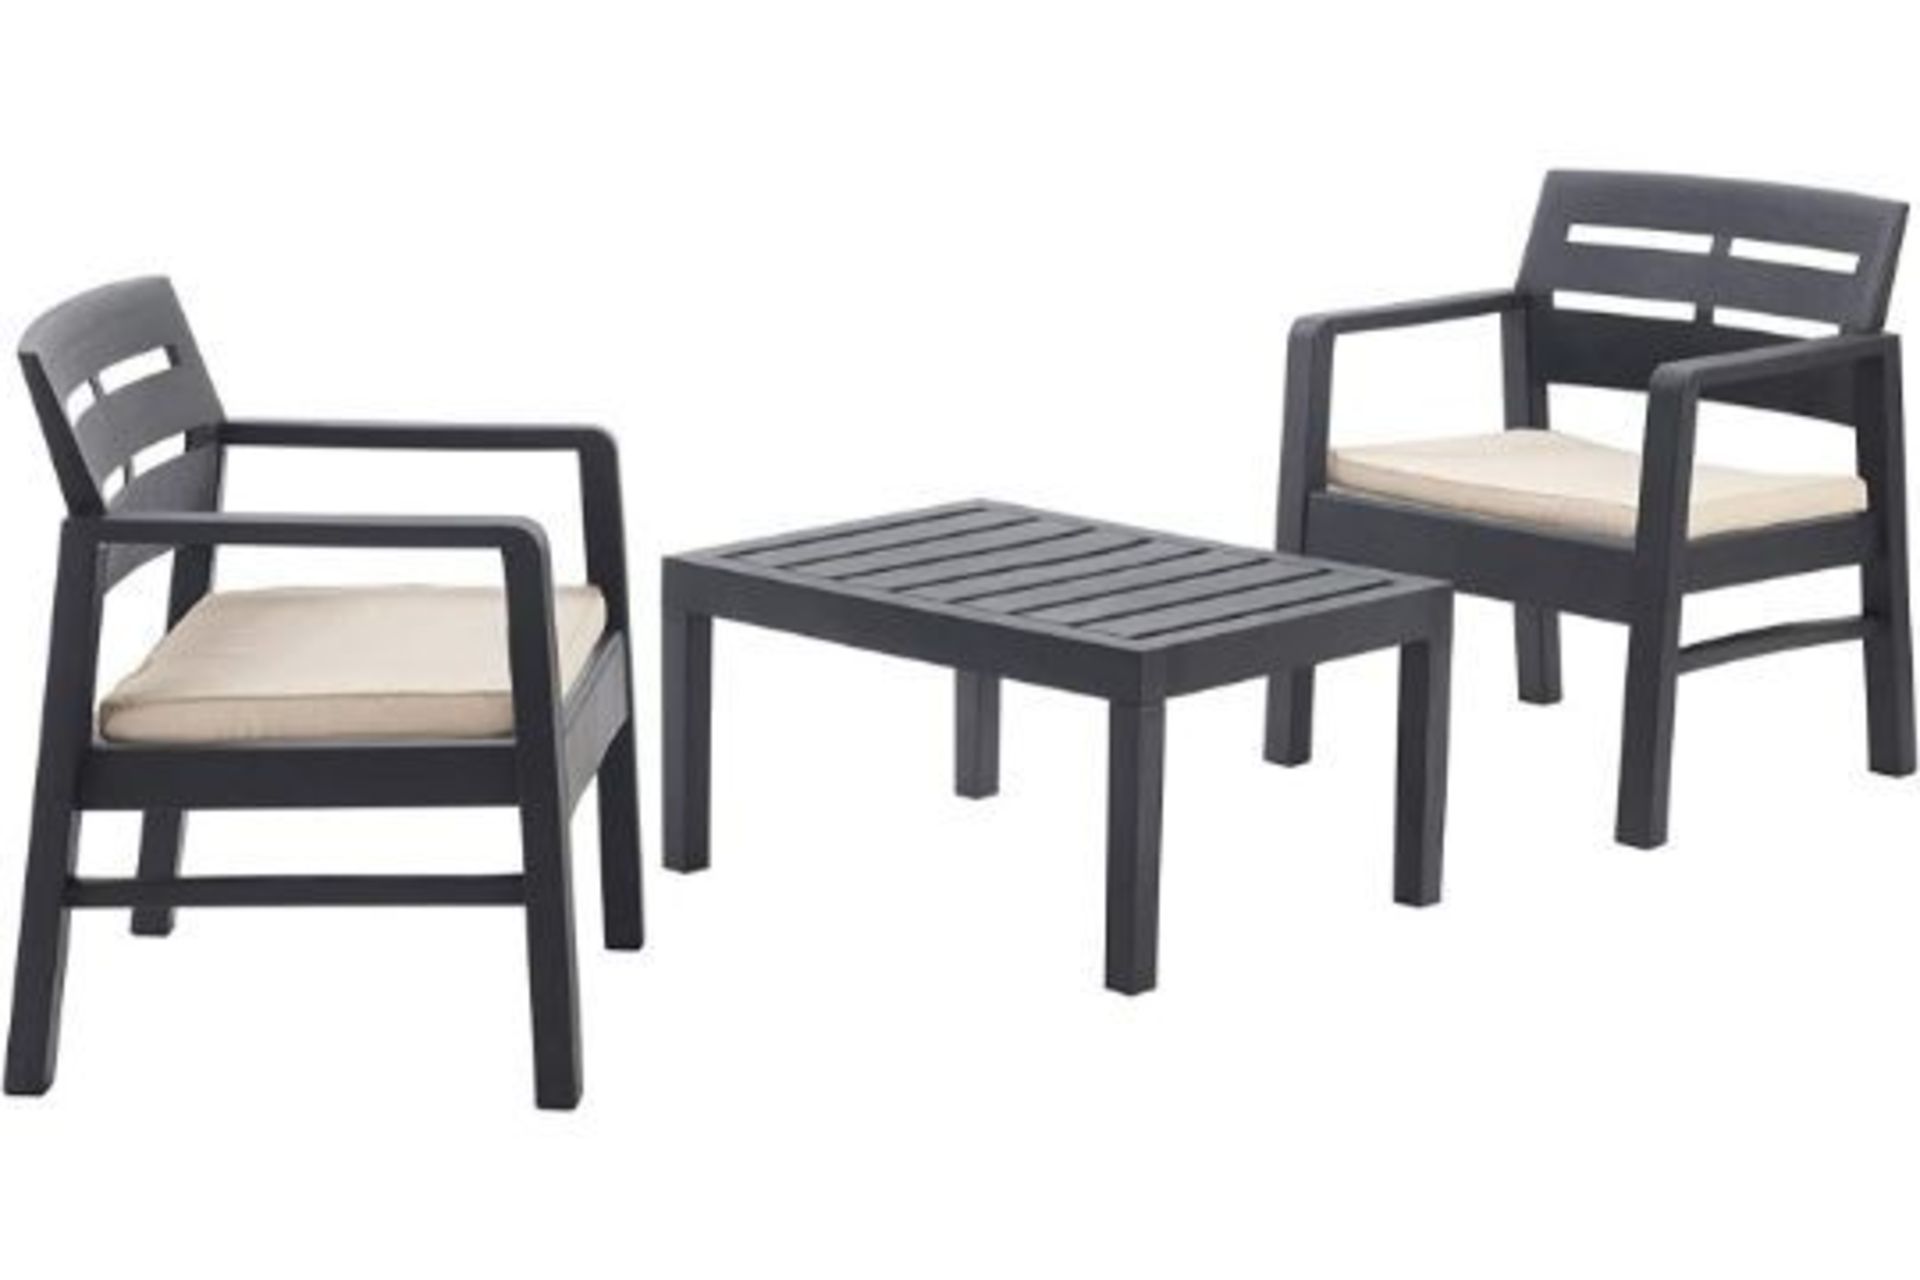 BRAND NEW IPAE WOOD GRAIN EFFECT GARDEN FURNITURE SET WITH TABLE AND 2 LARGE ARM CHAIRS PATIO SET